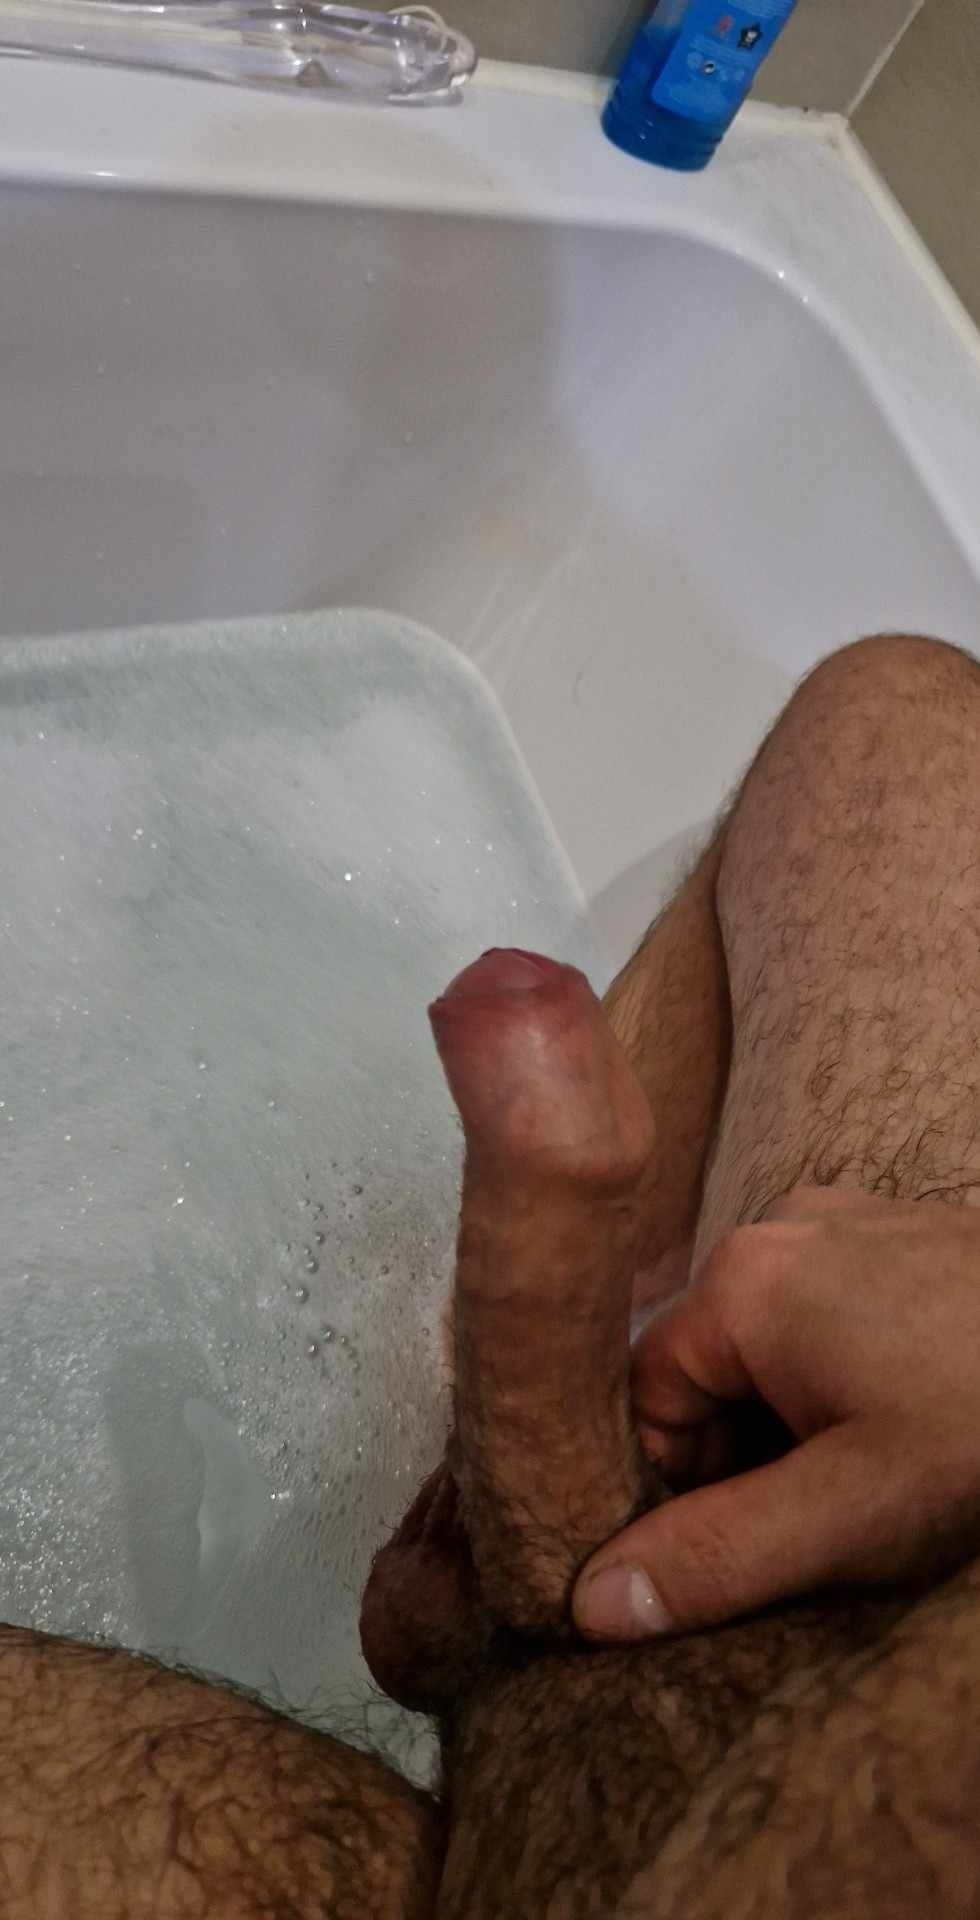 In the bath...